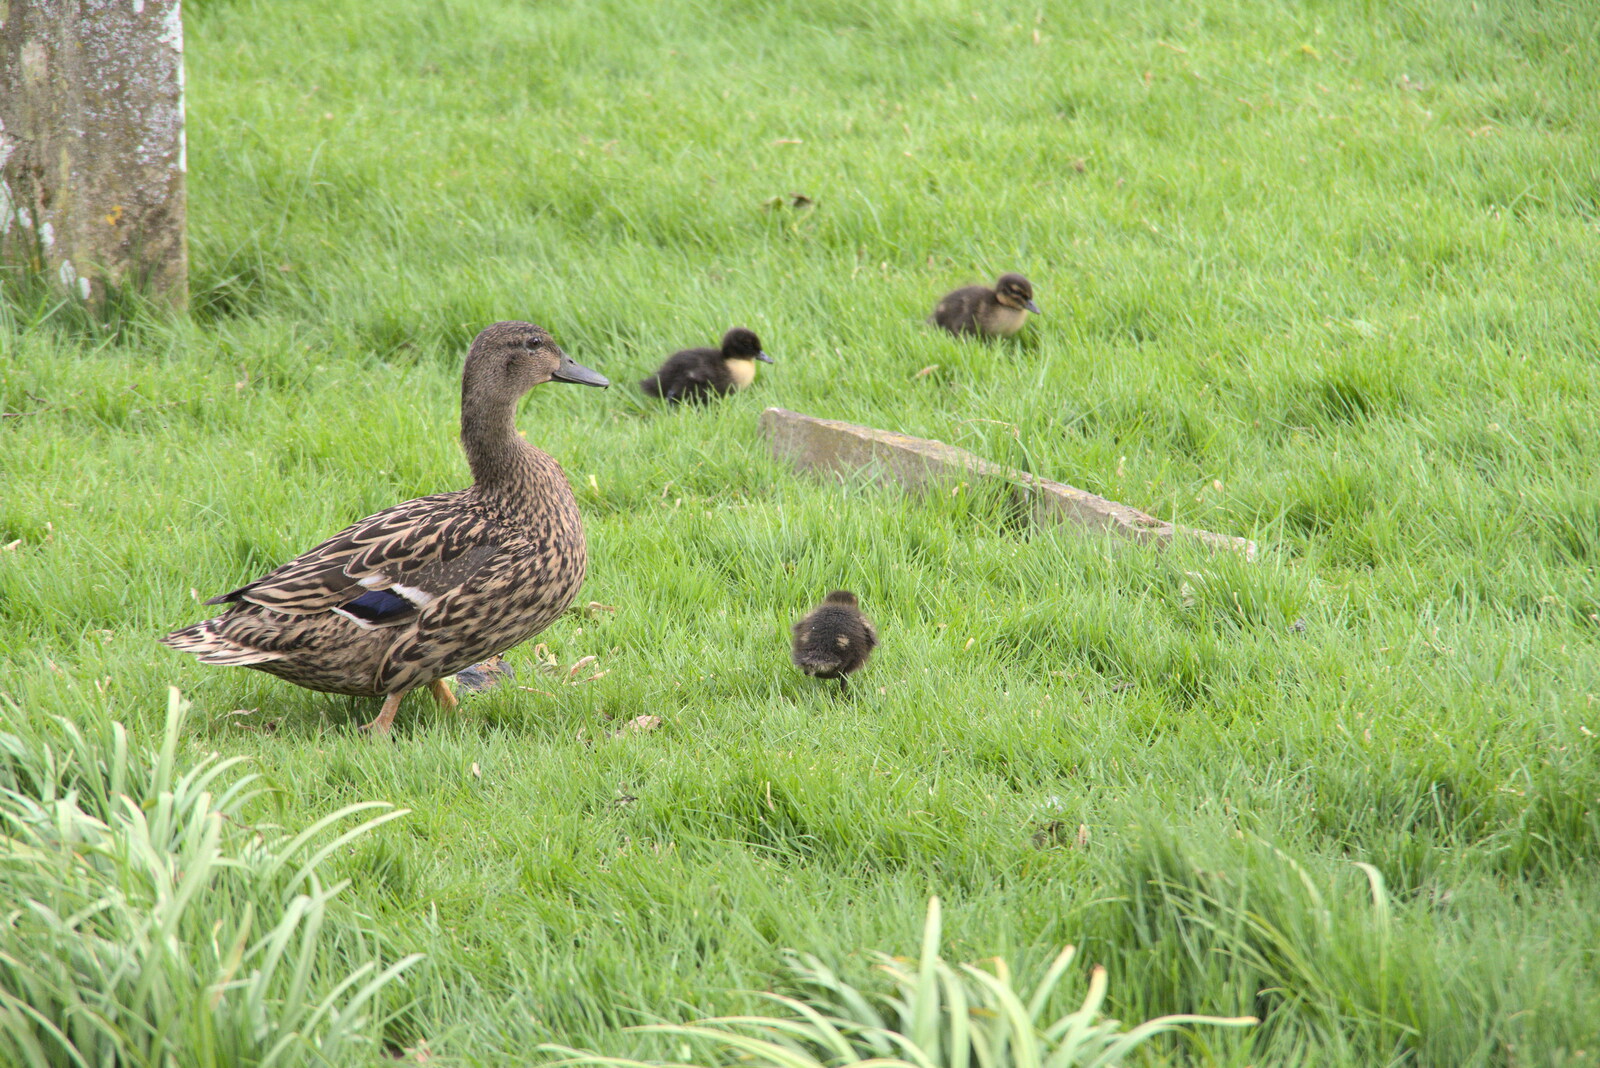 A duck with fluffy ducklings from A Vaccination Afternoon, Swaffham, Norfolk - 9th May 2021